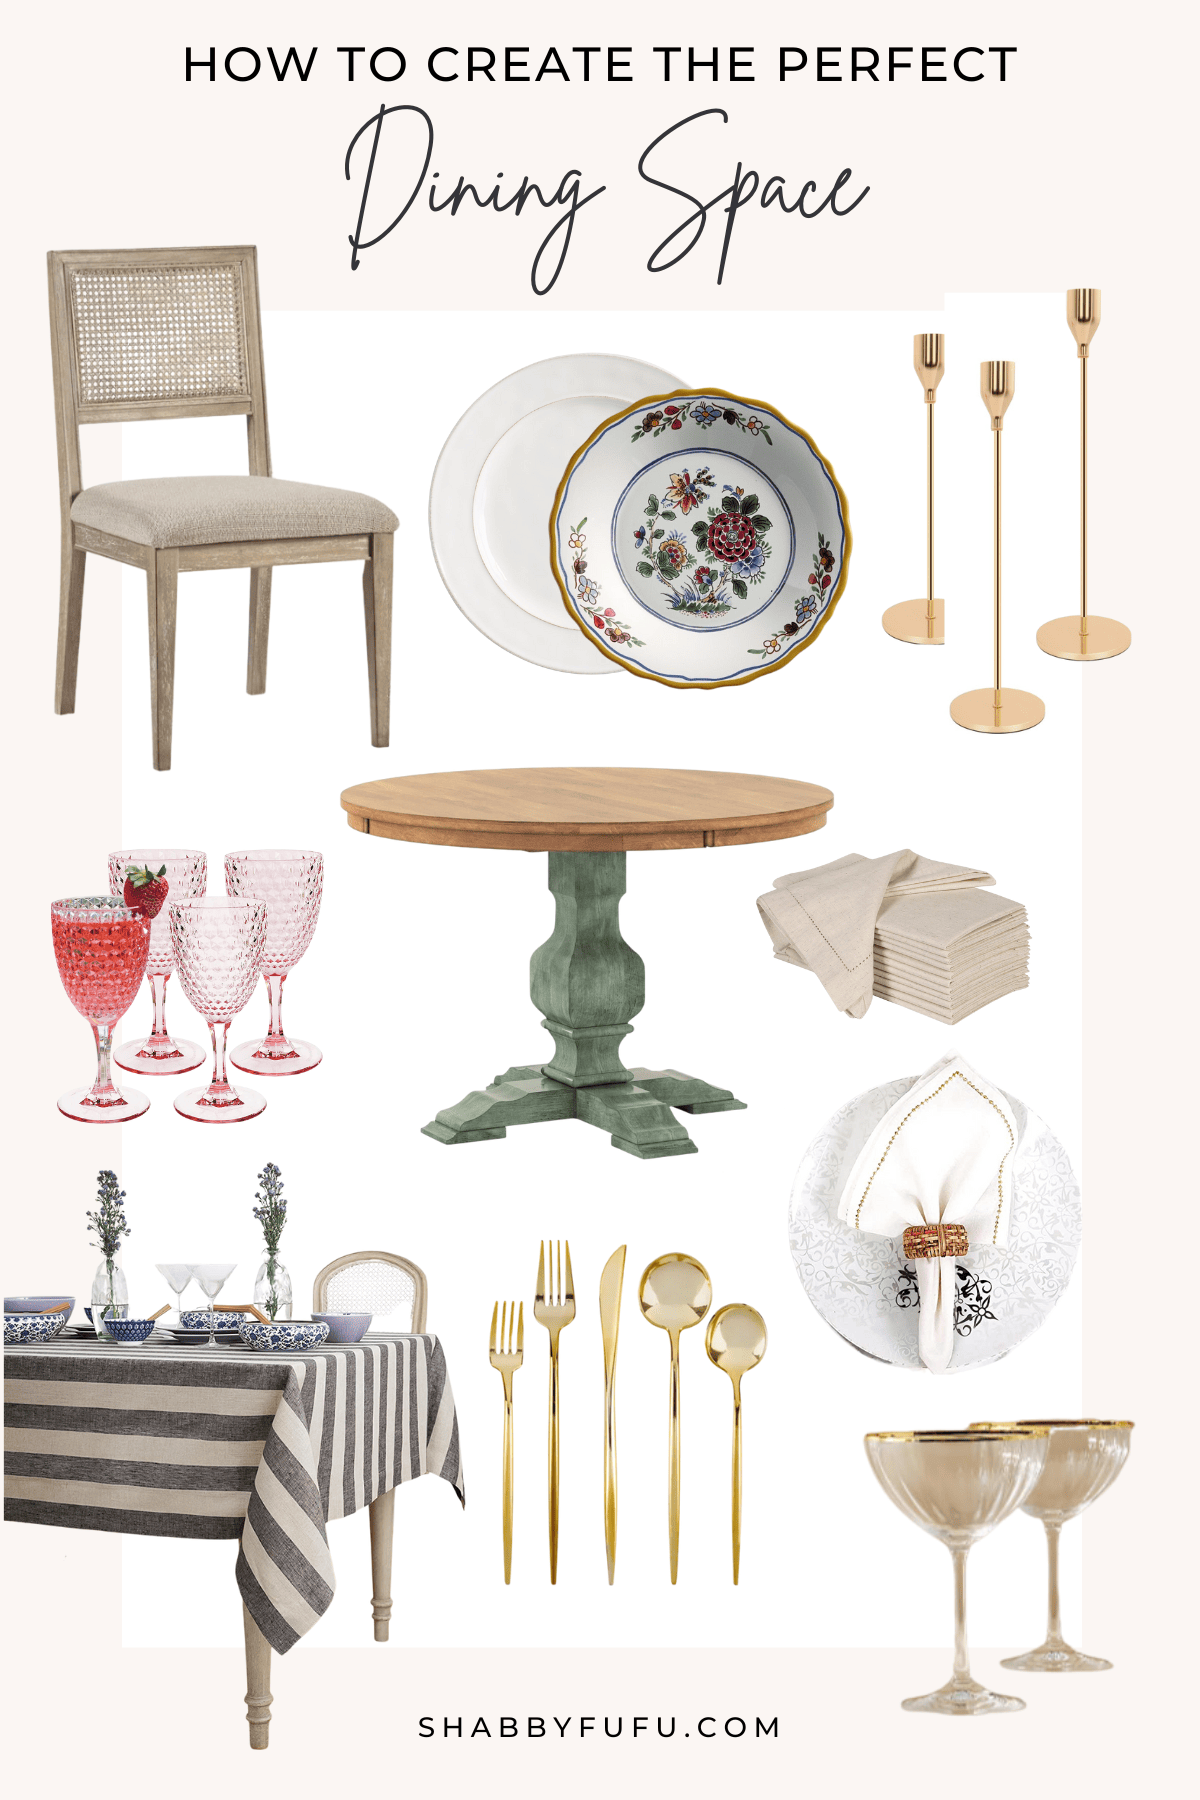 Collage image featuring tableware products along with  chairs and tables, titled "how to create the perfect dining spot"